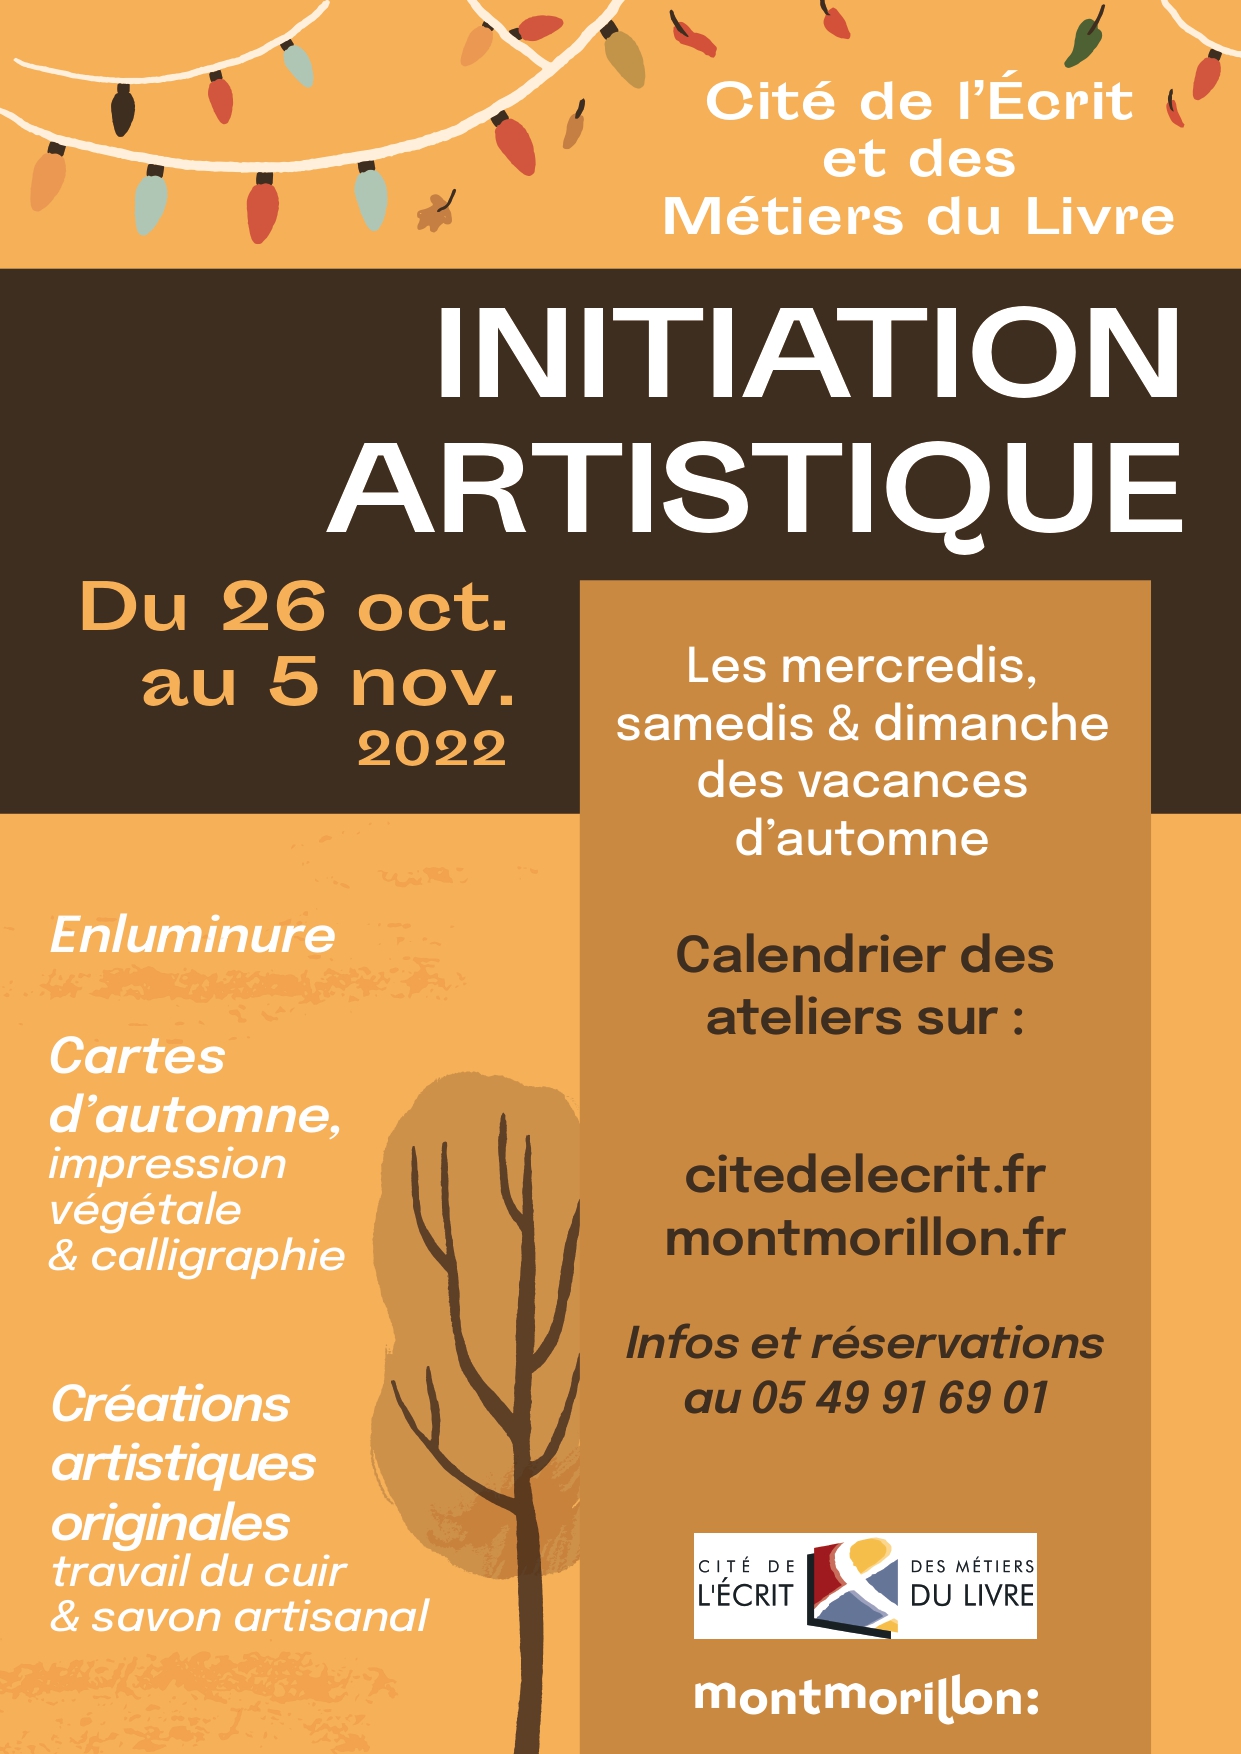 Ateliers d'automne FLYERS PDF recto verso_pages-to-jpg-0001